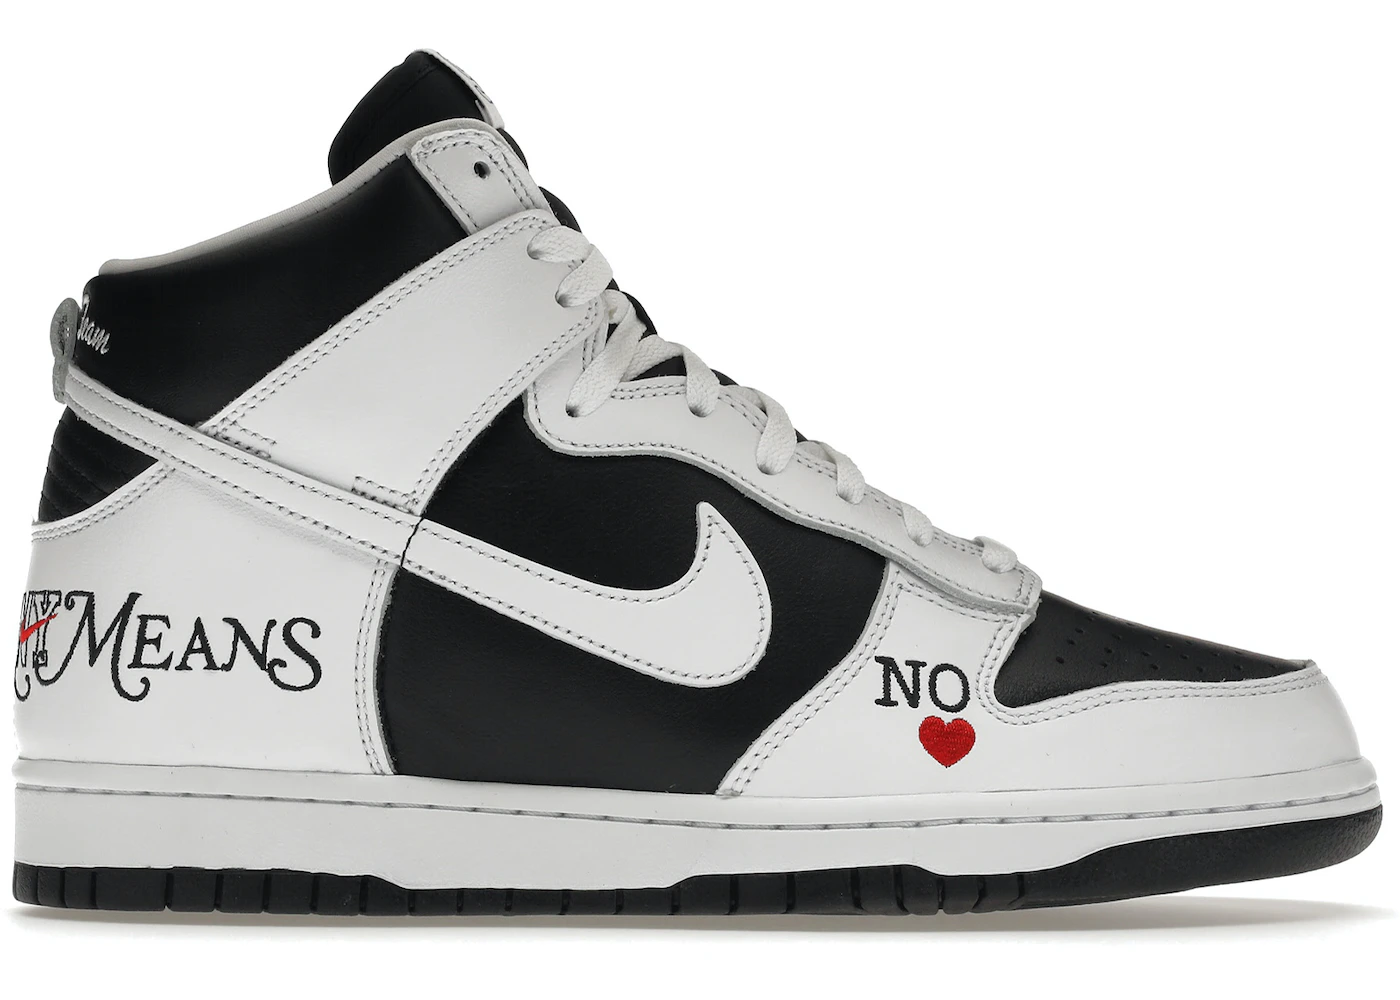 Nike SB High By Any Means -